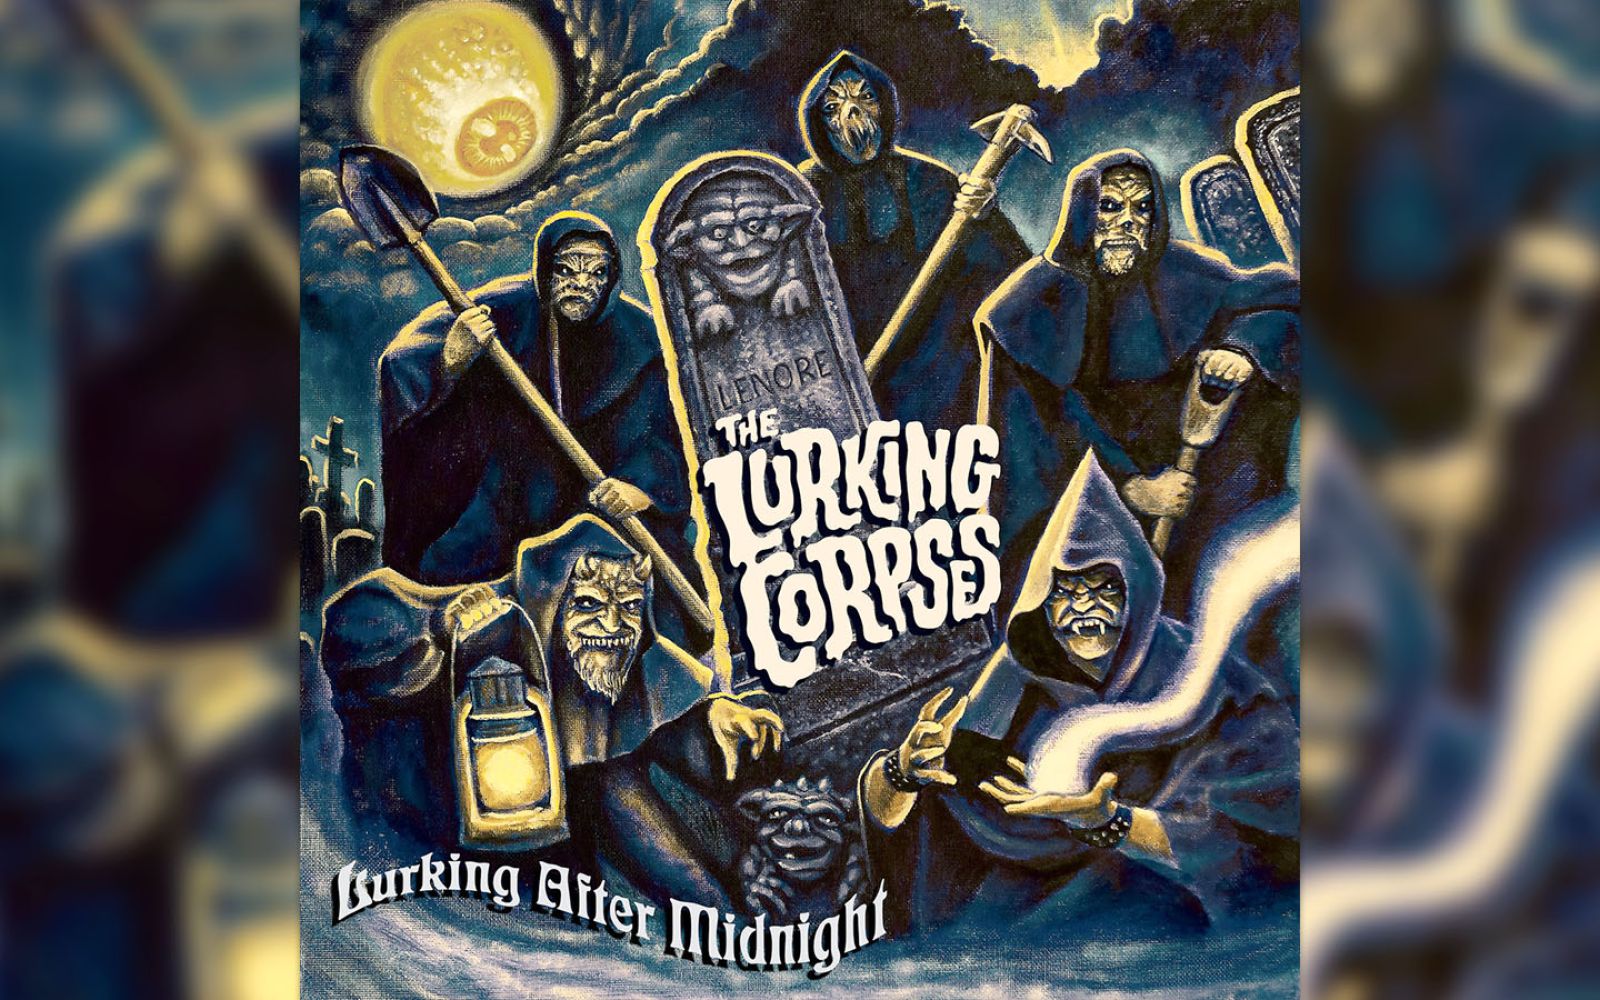 Following a 10-year hiatus, The Lurking Corpses have returned with "Lurking After Midnight."